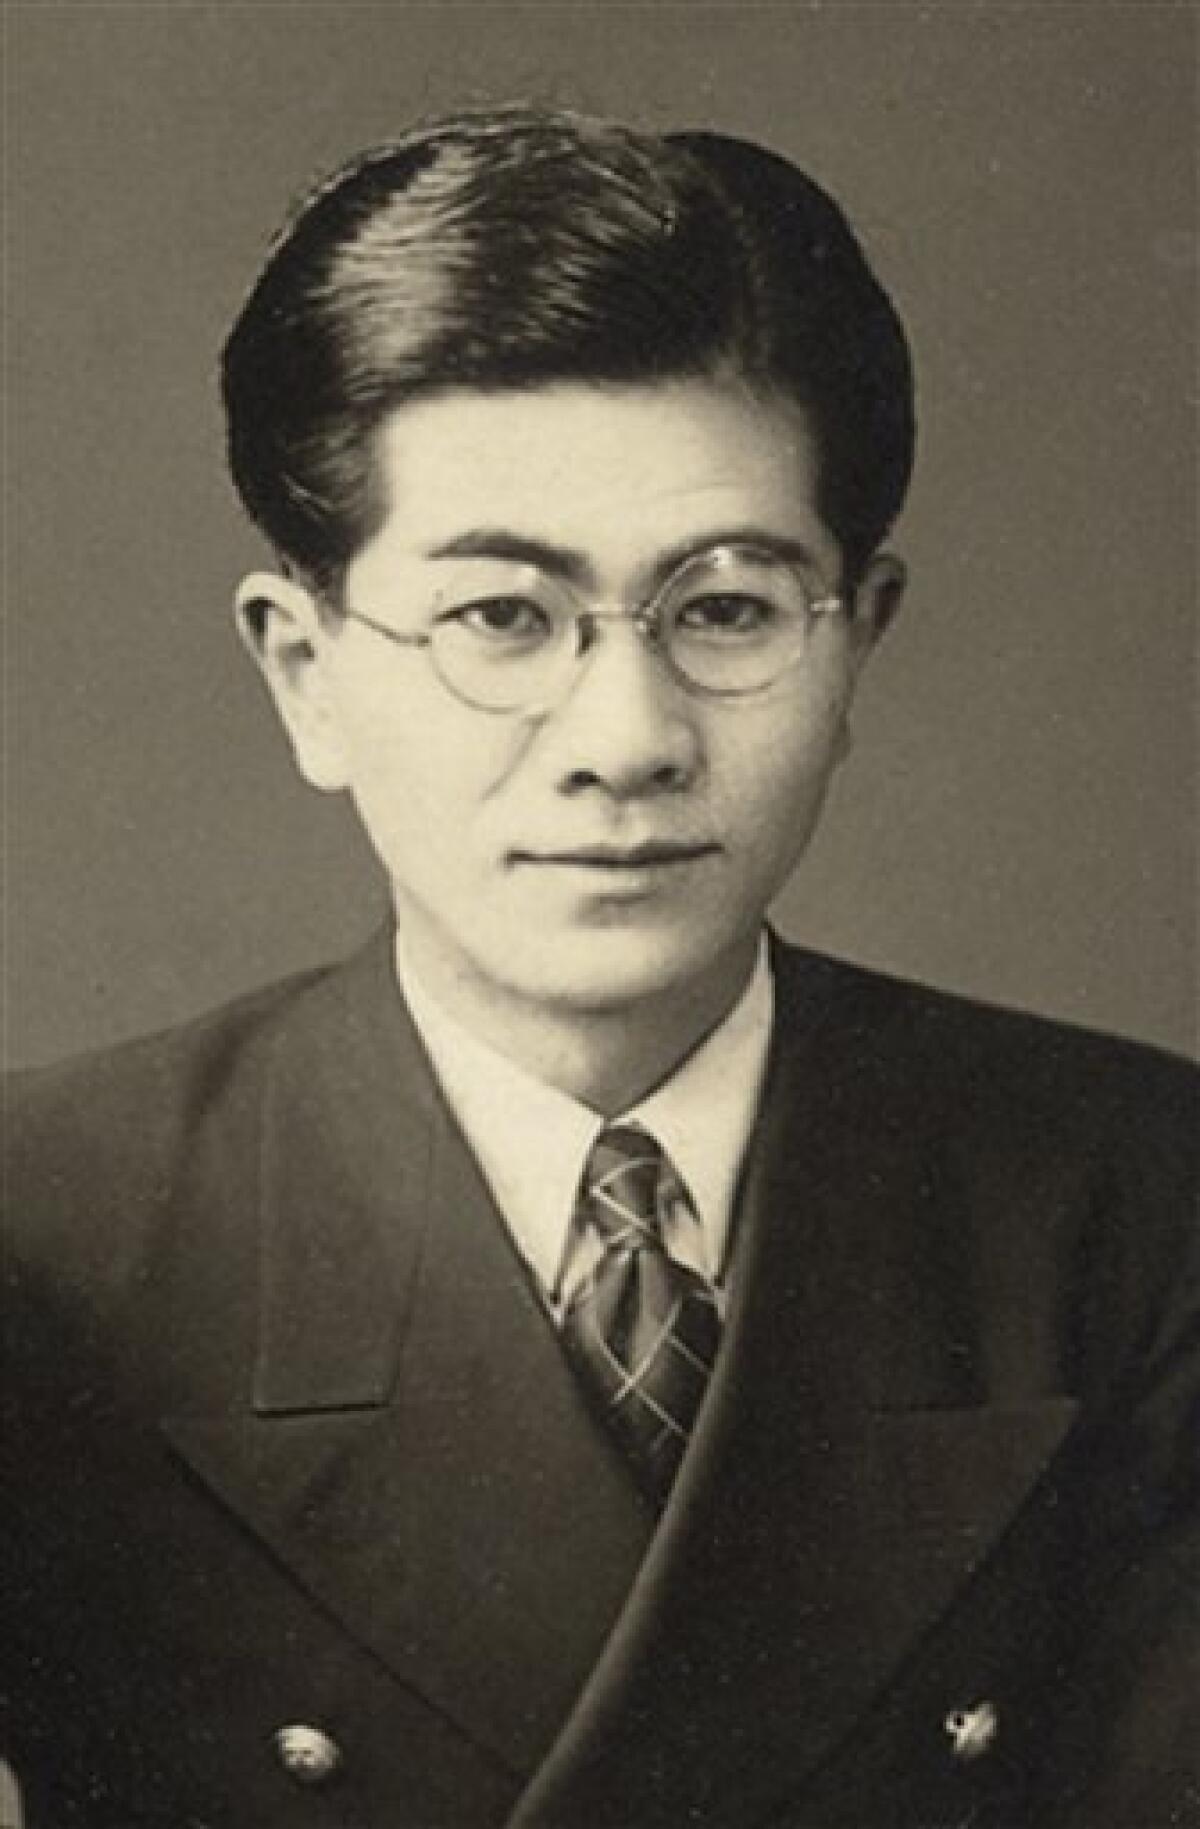 This undated photo kept in a diary owned by Tatsuo Osako of the Japan Tourist Bureau and released on July 26, 2010 by Akira Kitade, shows Osako. This photo was in the diary with seven photos given to him by people whom Osako helped escape from Europe in the early days of World War II. The recently discovered group of prints throws more light on a subplot of the Holocaust: the small army of Japanese bureaucrats who helped shepherd thousands of Jews to safety. (AP Photo/Tatsuo Osako) EDITORIAL USE ONLY